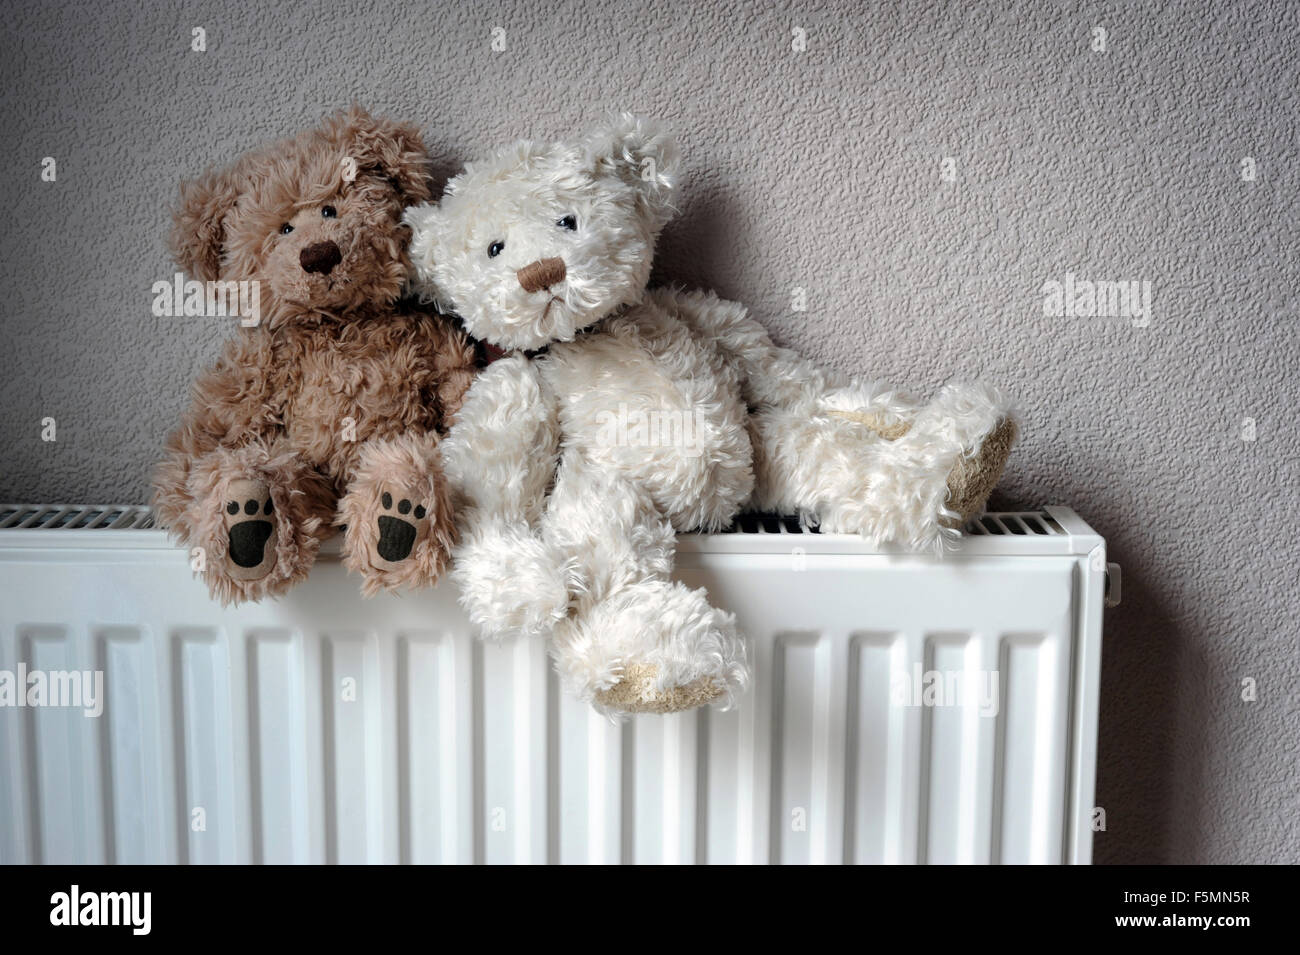 TEDDY BEARS SITTING ON DOMESTIC RADIATOR RE HOMES CENTRAL HEATING WARM INSULATION HEATING WINTER FUEL BILLS COSTS GAS FUEL COSY Stock Photo